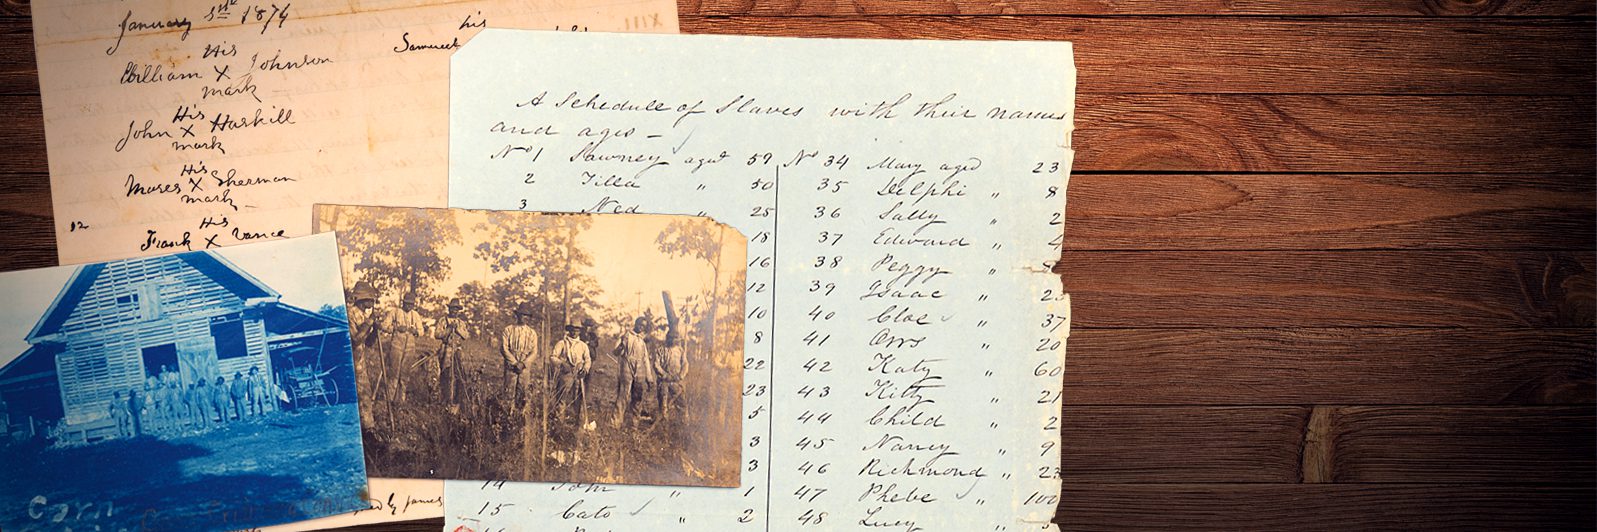 Historic documents and images are spread out on a table.